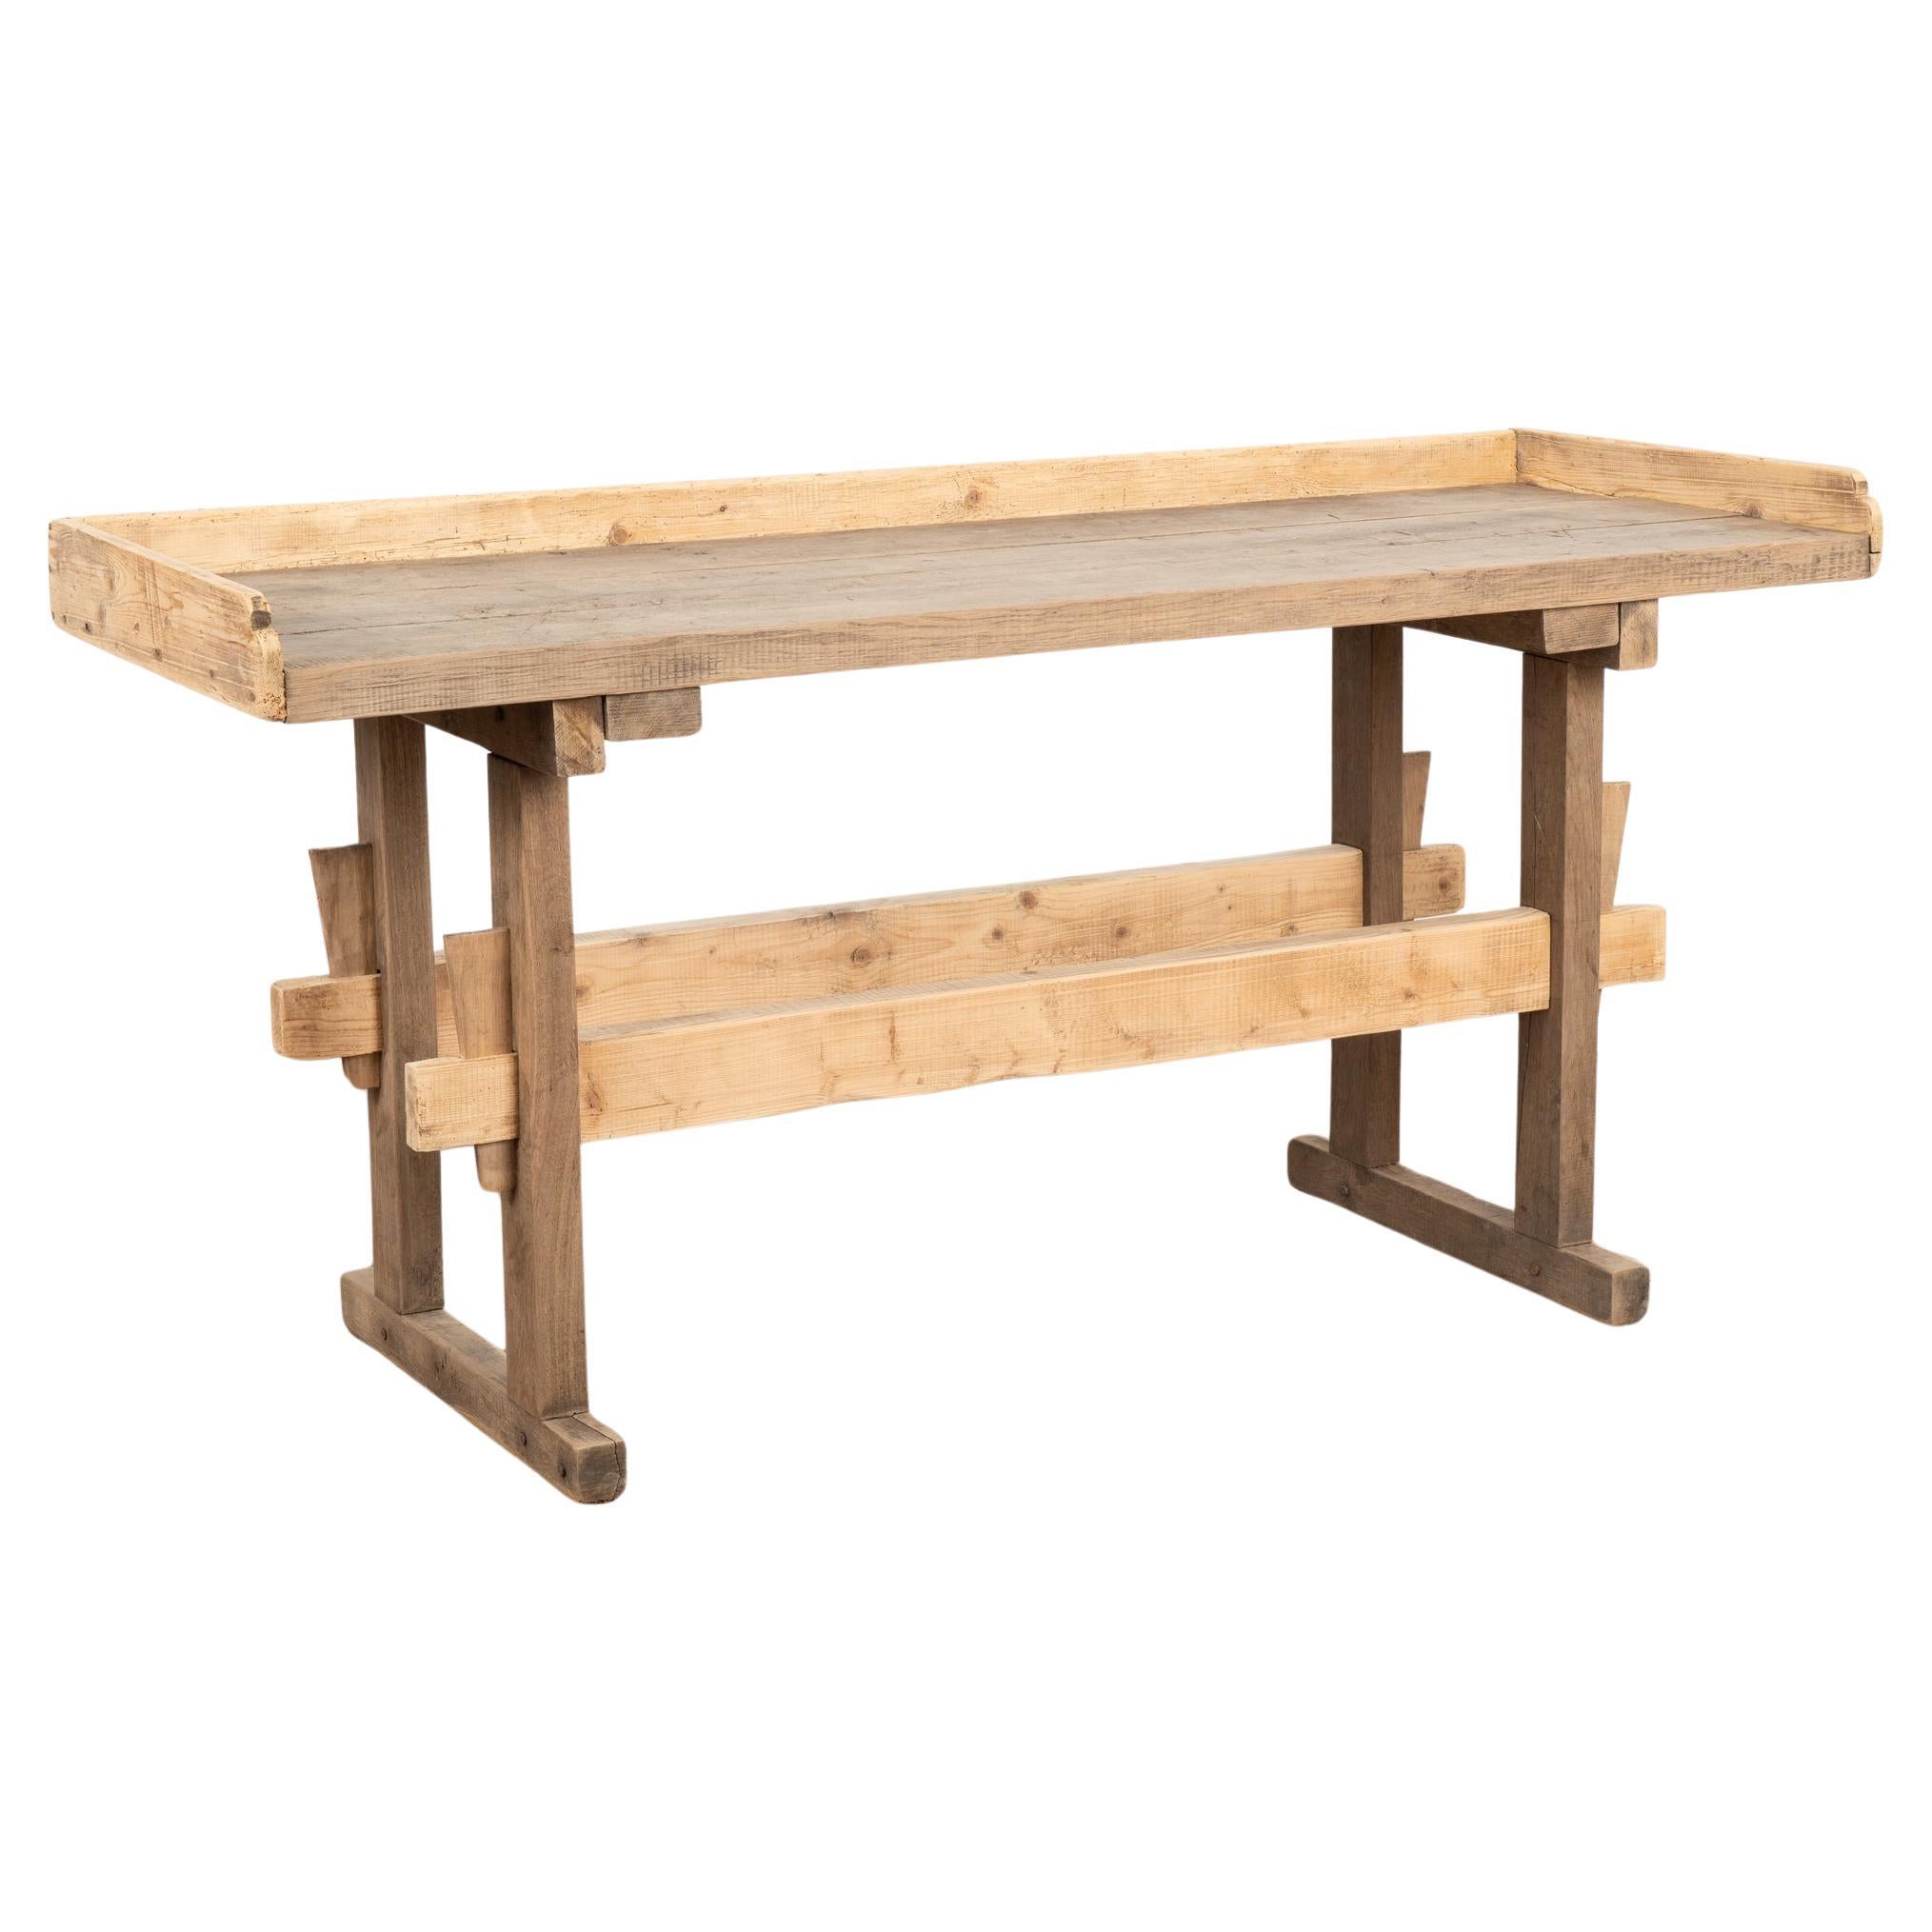 Rustic Work Table Console Table, circa 1880 from Hungary For Sale